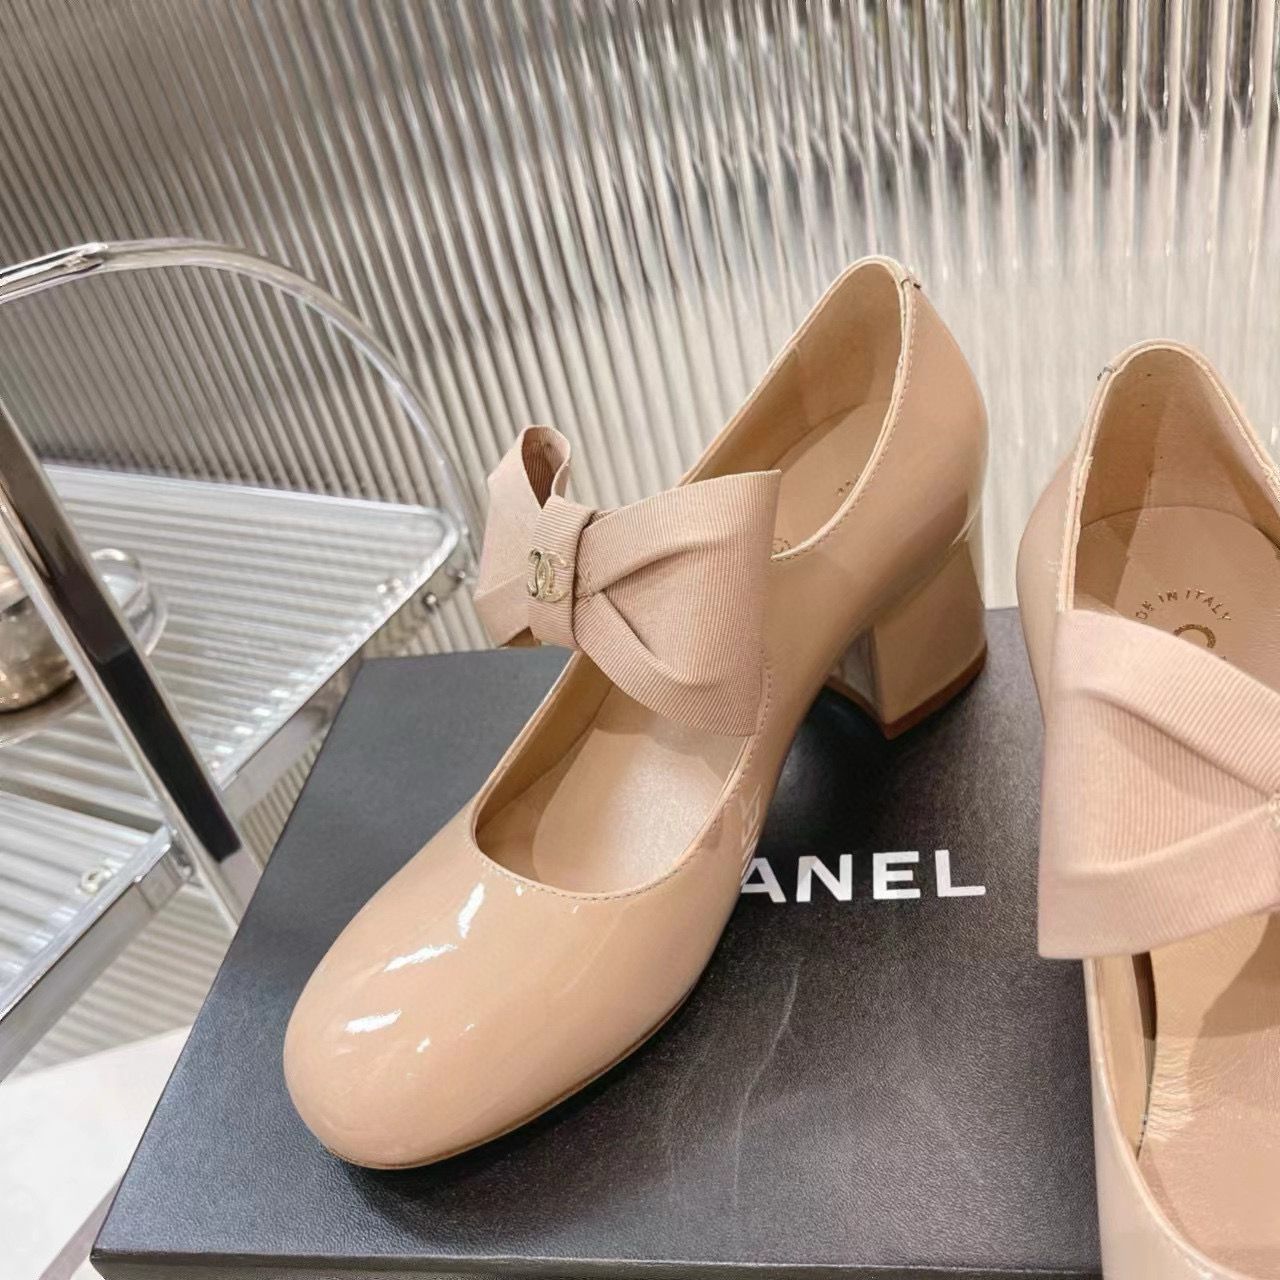 Chanel 24C Bow Mary Jane Shoes Original Patent Calf Leather 55MM Heels C85923 Nude